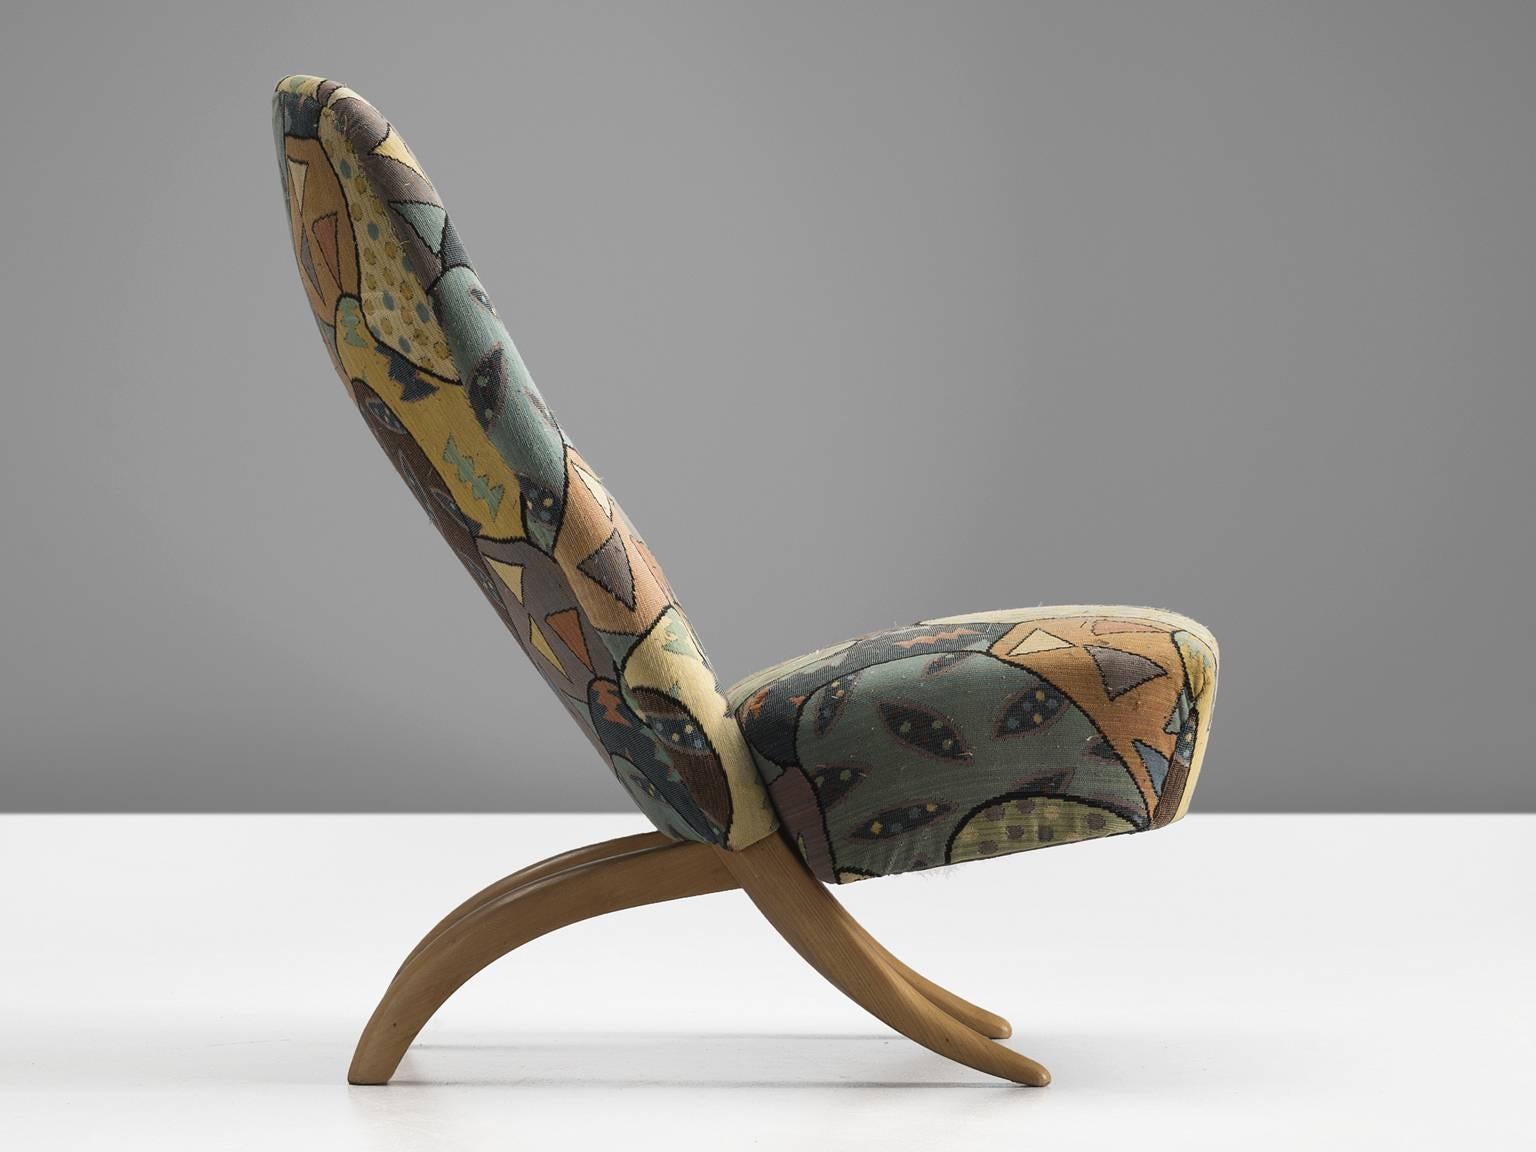 'Congo' lounge chair, in wood and fabric, by Theo Ruth for Artifort, the Netherlands, 1952.

This 'Congo' easy chair by Theo Ruth is upholstered in an 1980s style graphic fabric. The chair has a unique construction making use of tension and